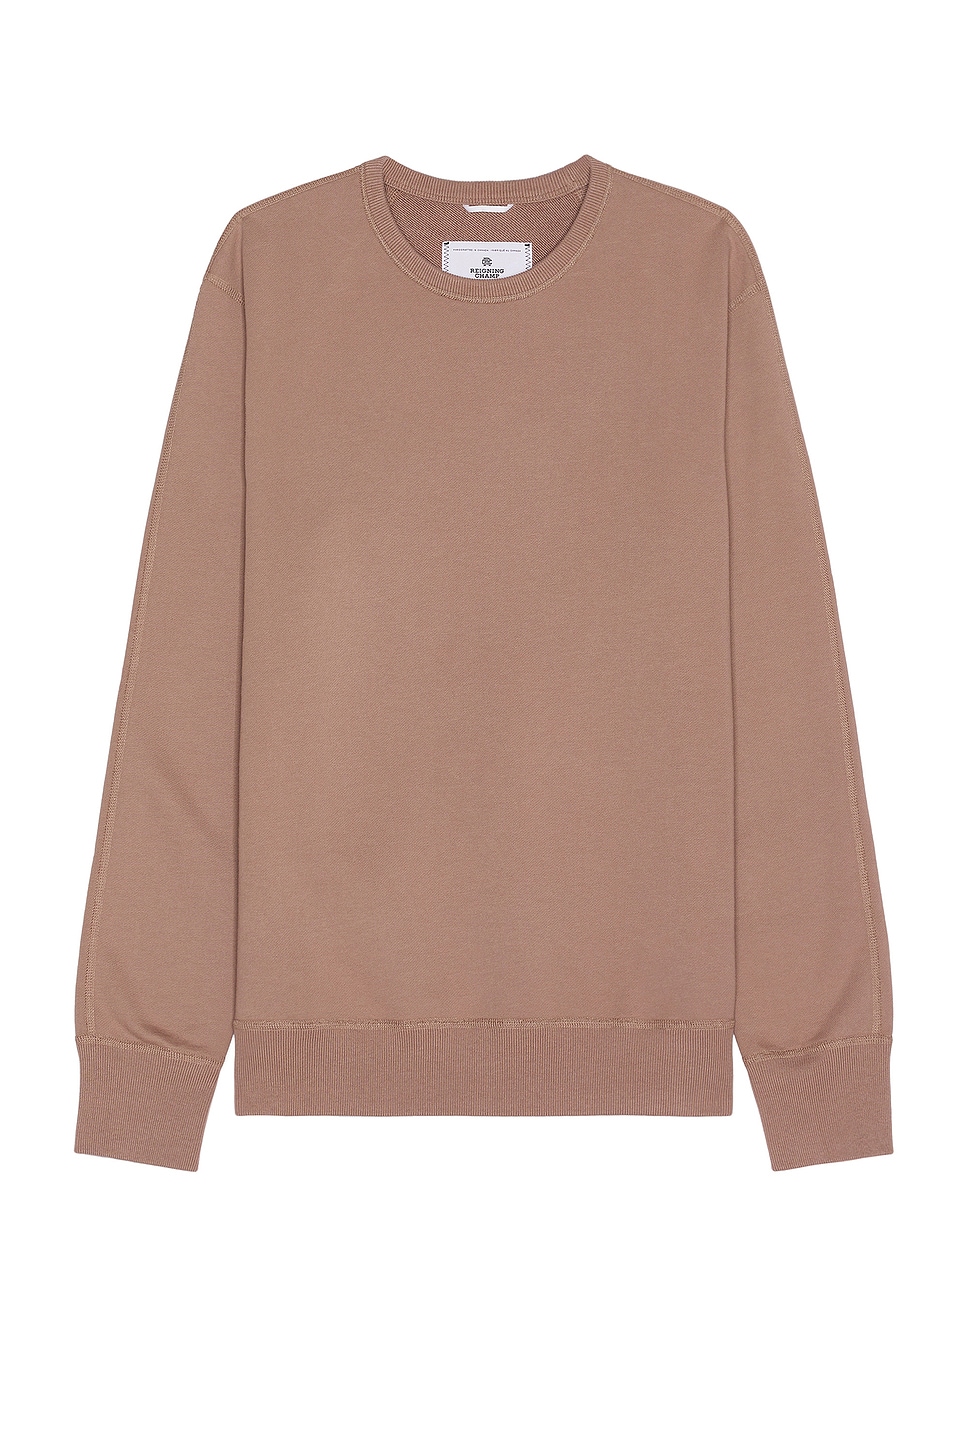 Image 1 of Reigning Champ Midweight Terry Crewneck in Desert Rose